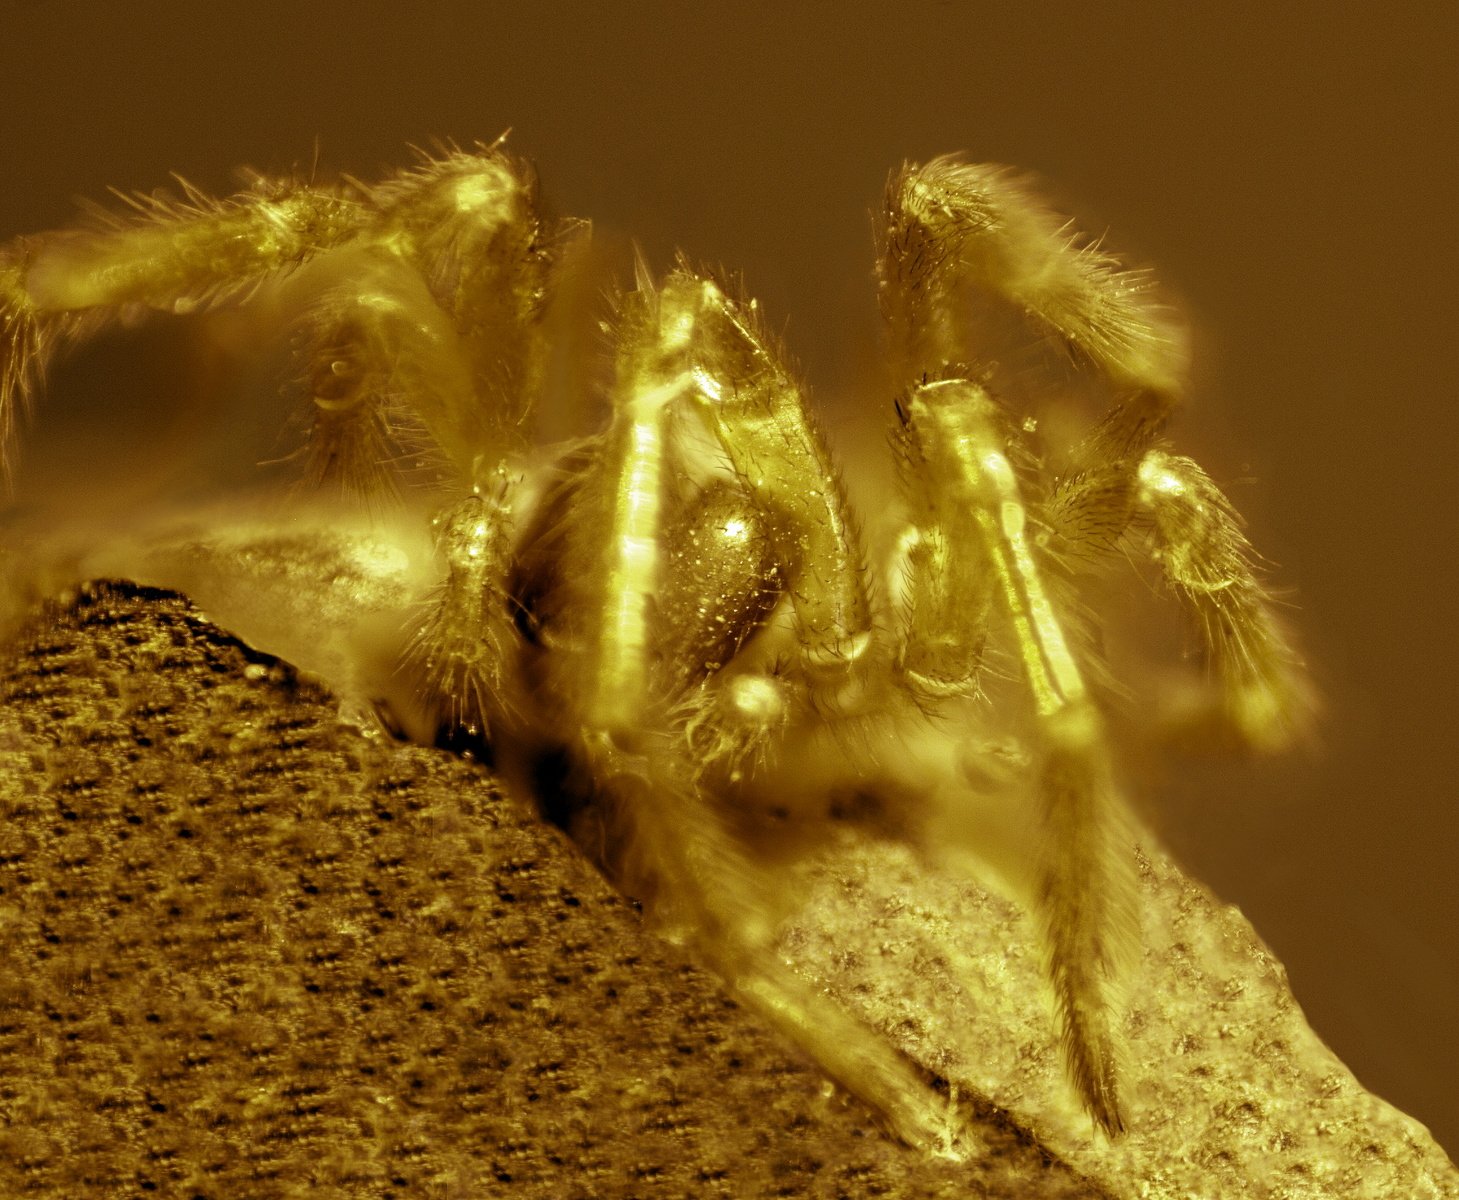 a spider is shown on a yellow background